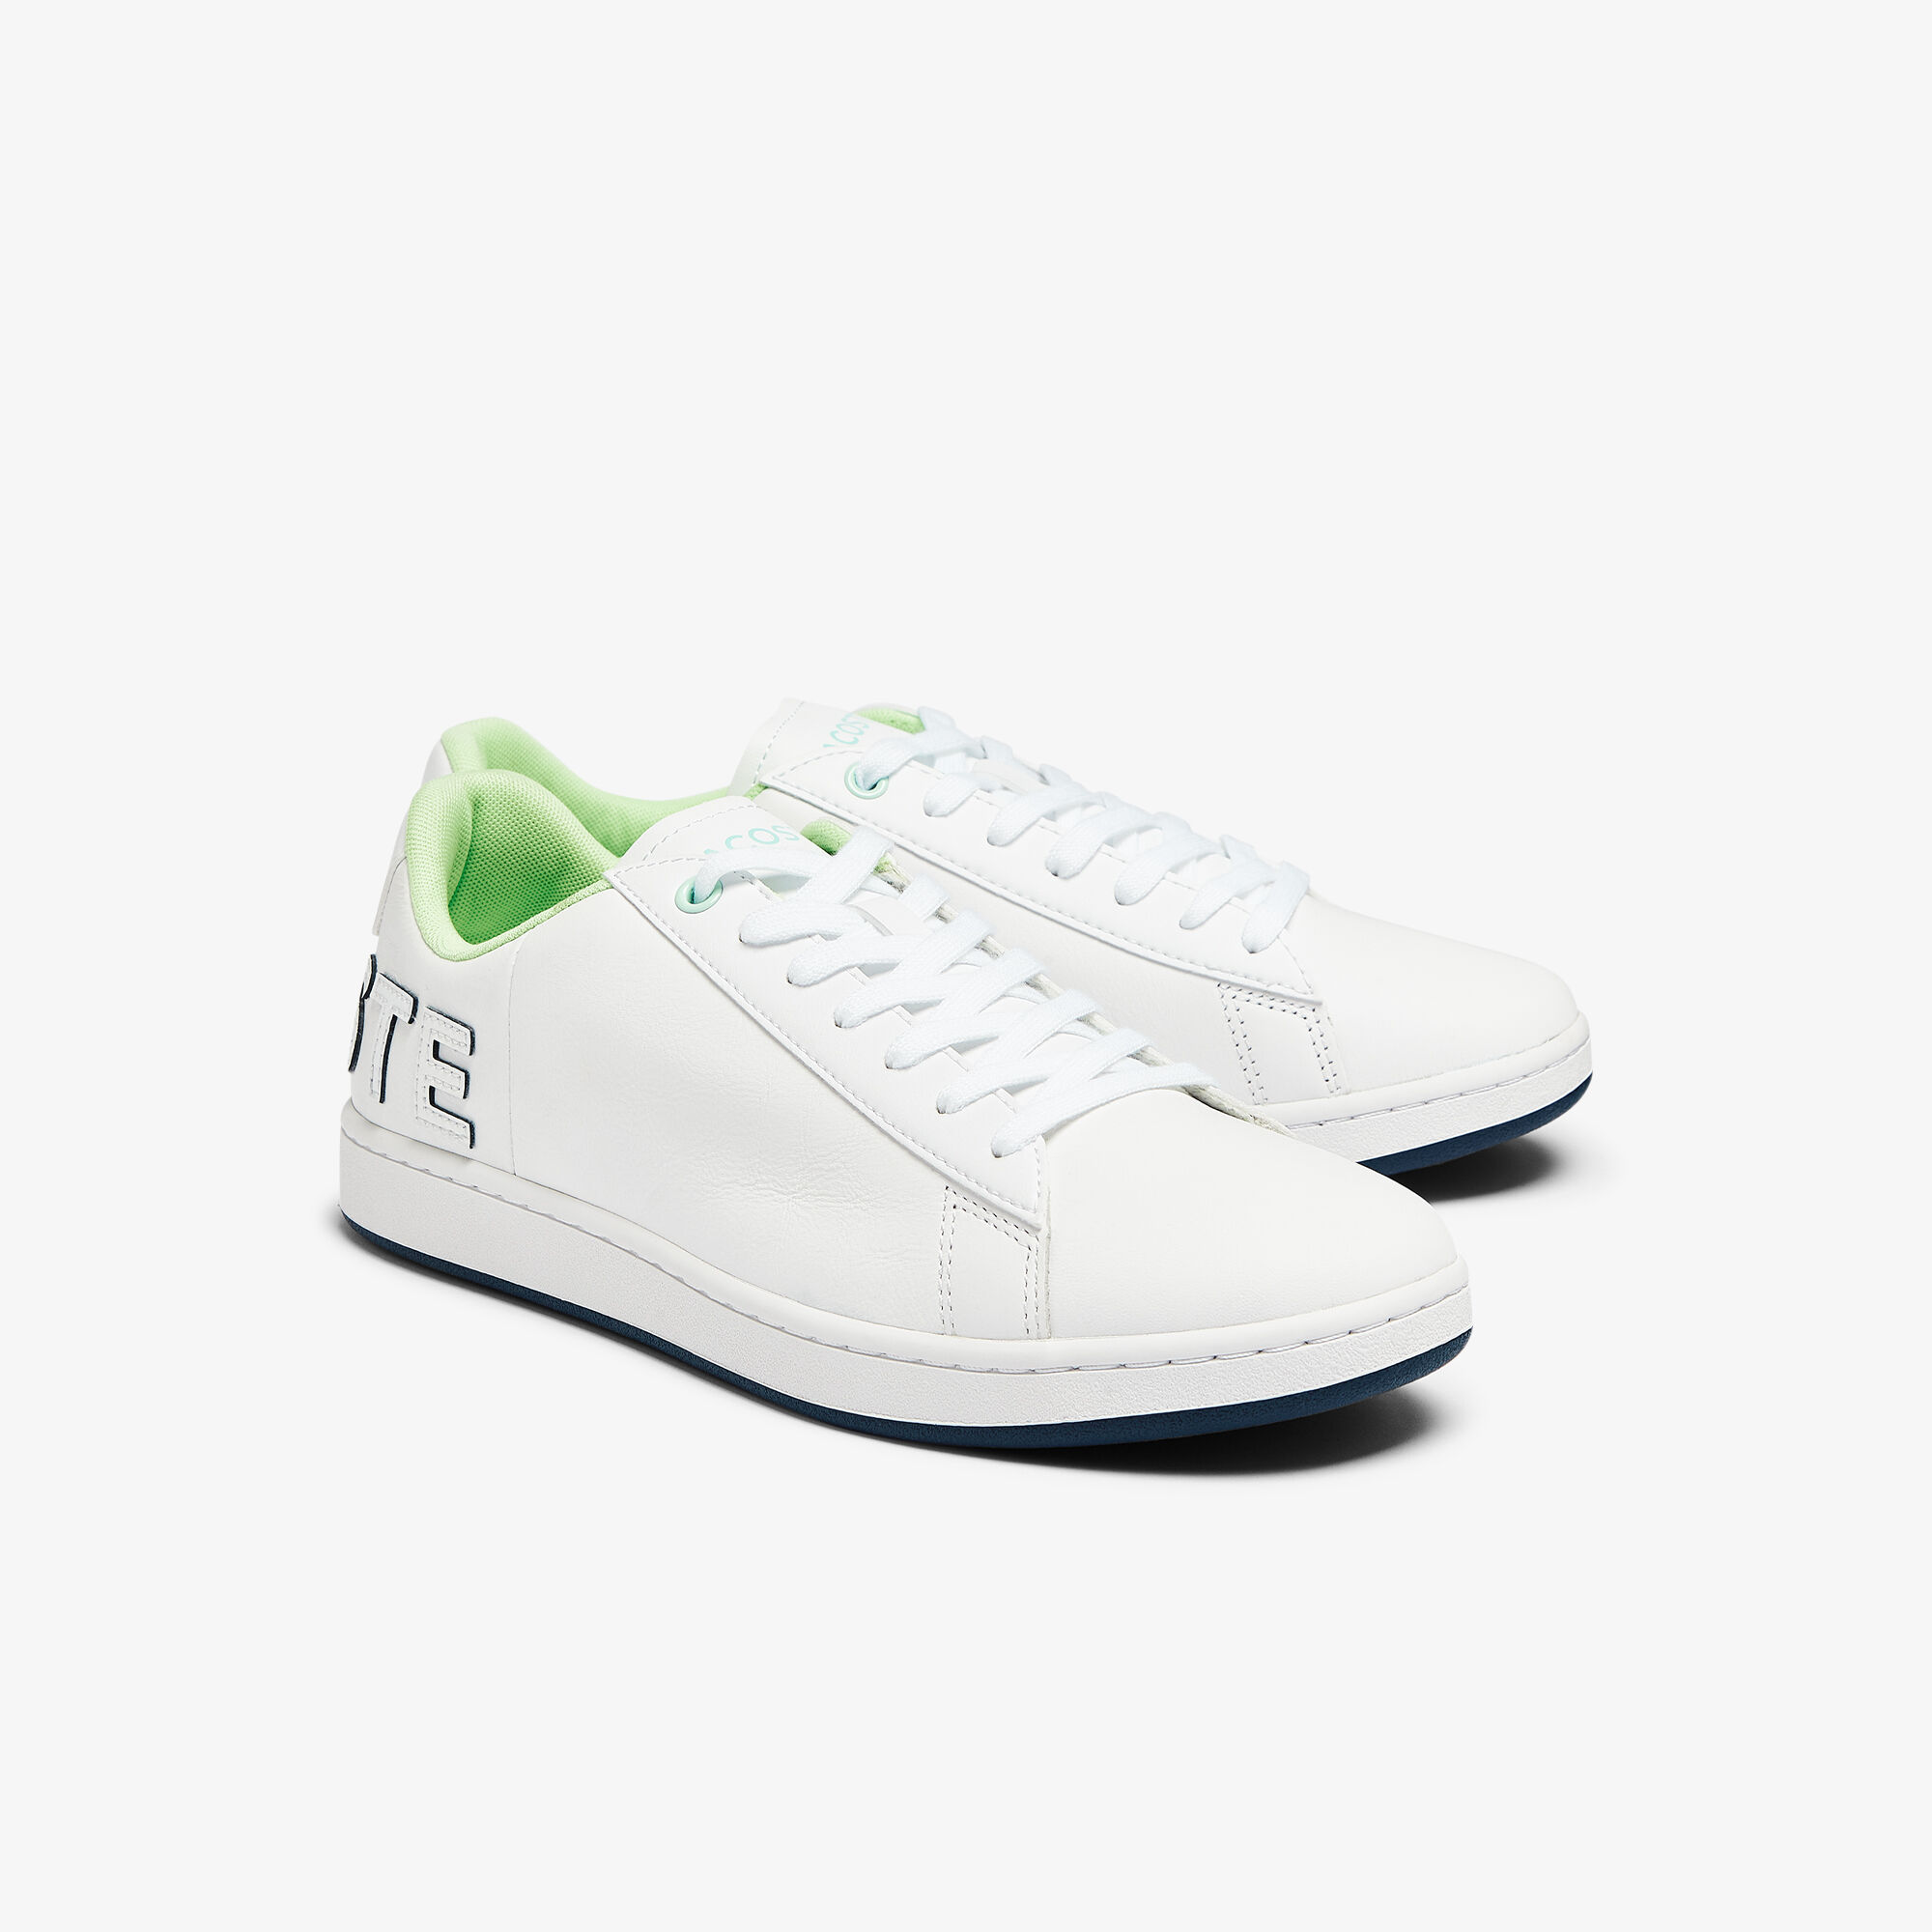 Men's Carnaby Evo Leather and Citrus Accent Trainers